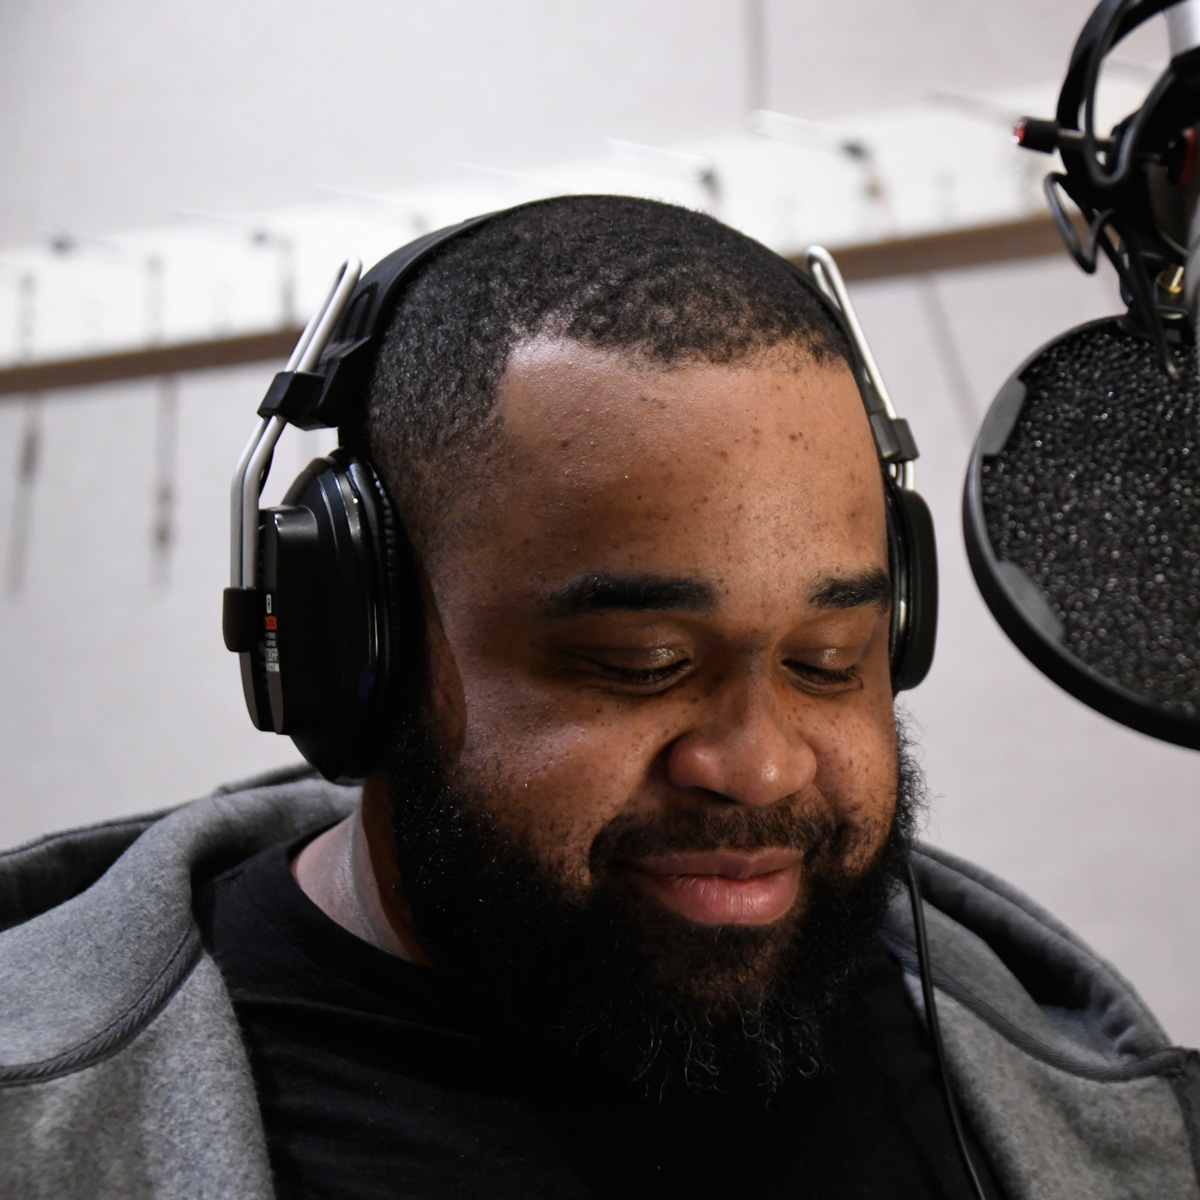 Jeffrey Lee Cheatham II wearing headphones, looking down, with a microphone pop screen to the right